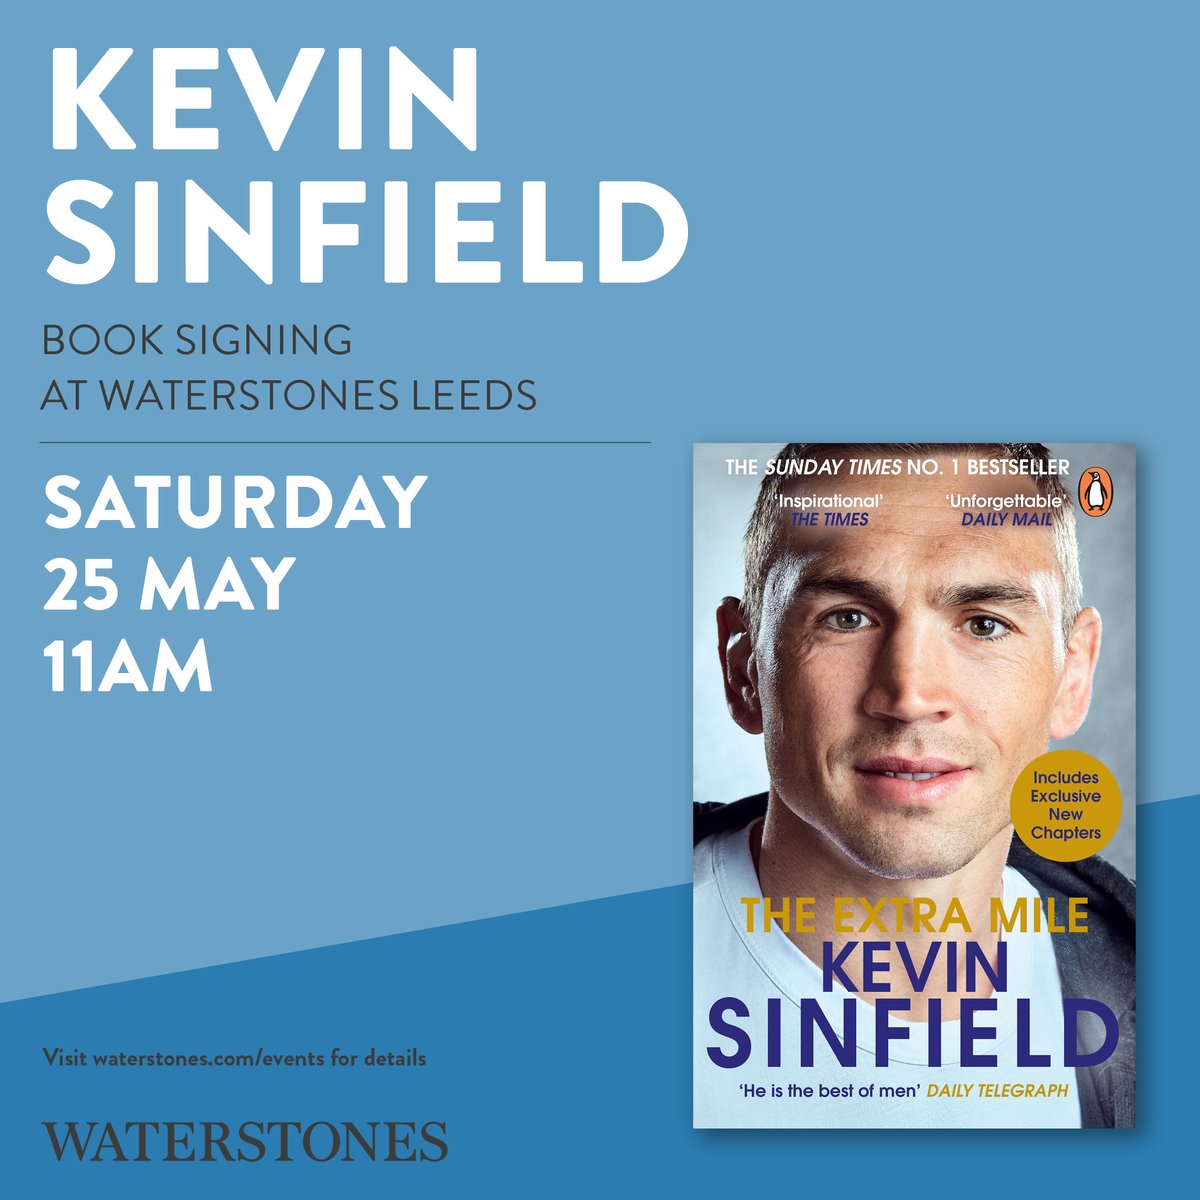 🏉 Meet Kevin Sinfield! 📅@WaterstonesLeeds will be welcoming Kevin Sinfield for a signing on Saturday 25th May at 11am 🖋️Kevin will be signing paperback copies of his best selling book #TheExtraMile No ticket needed, but spaces are first come first served